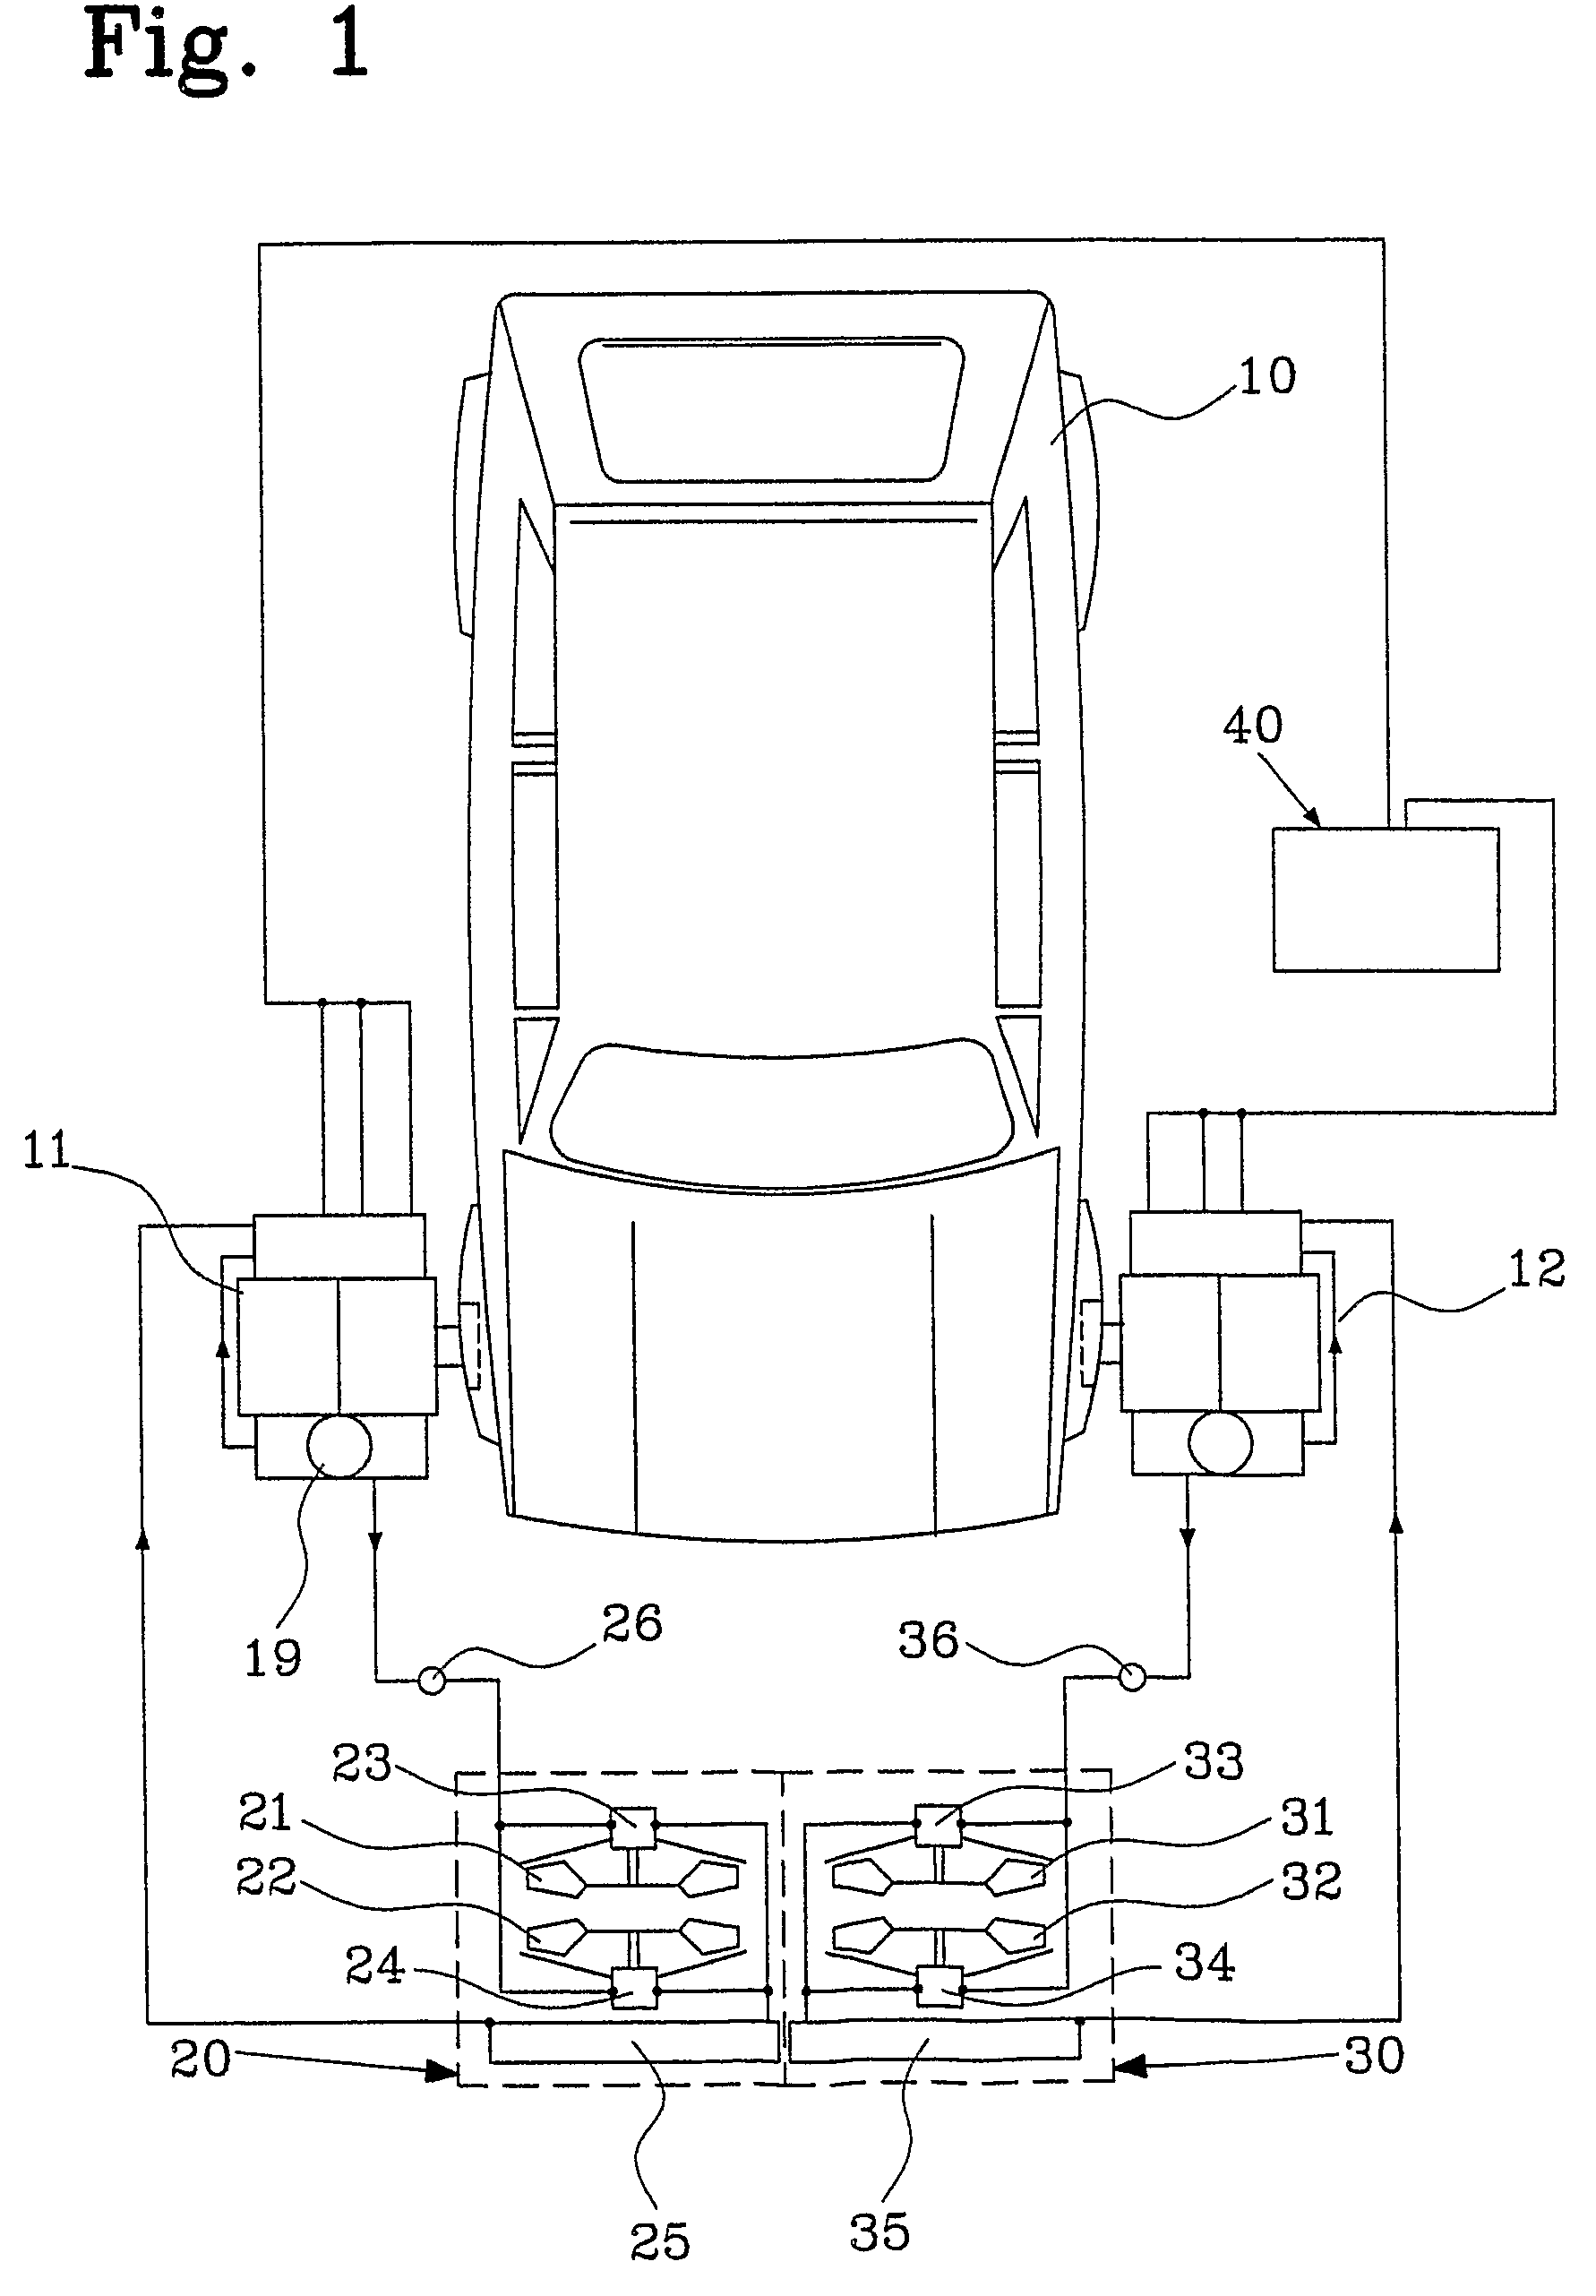 System and method for dynamometer testing of motor vehicles, including a cooling device